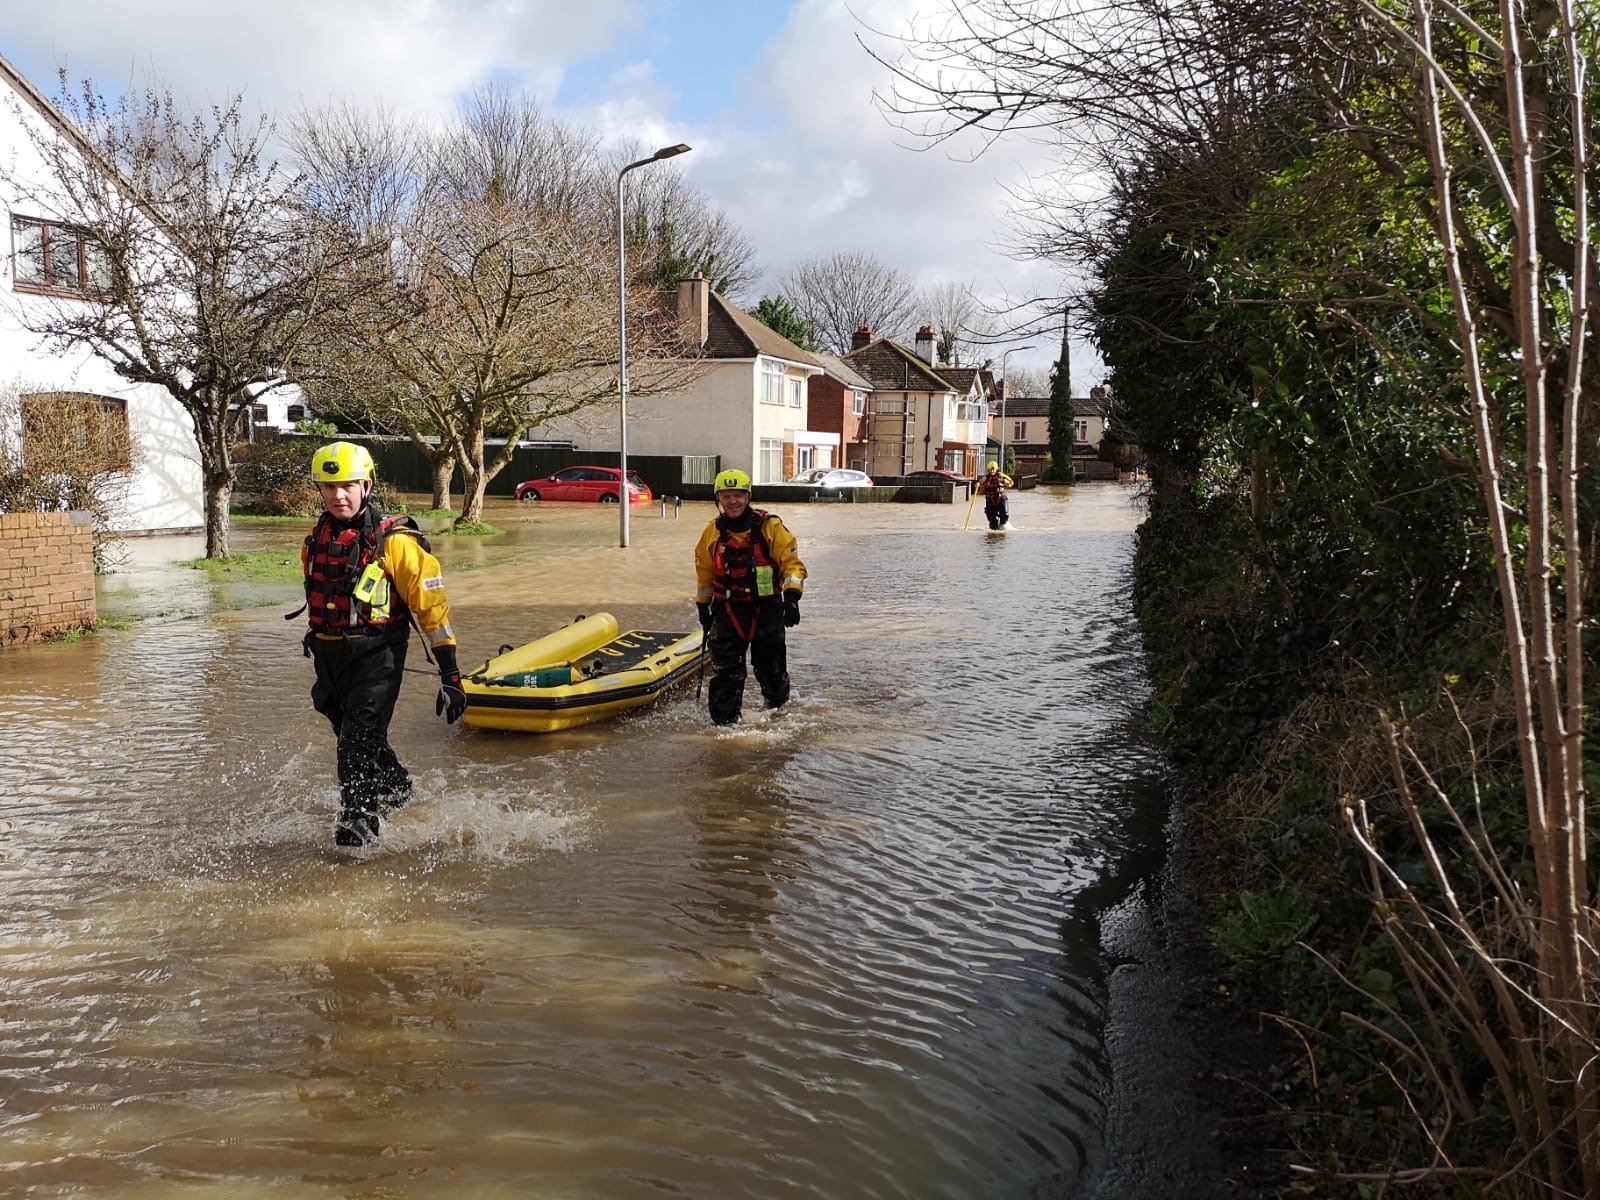 Emergency services pull dinghy through flood water